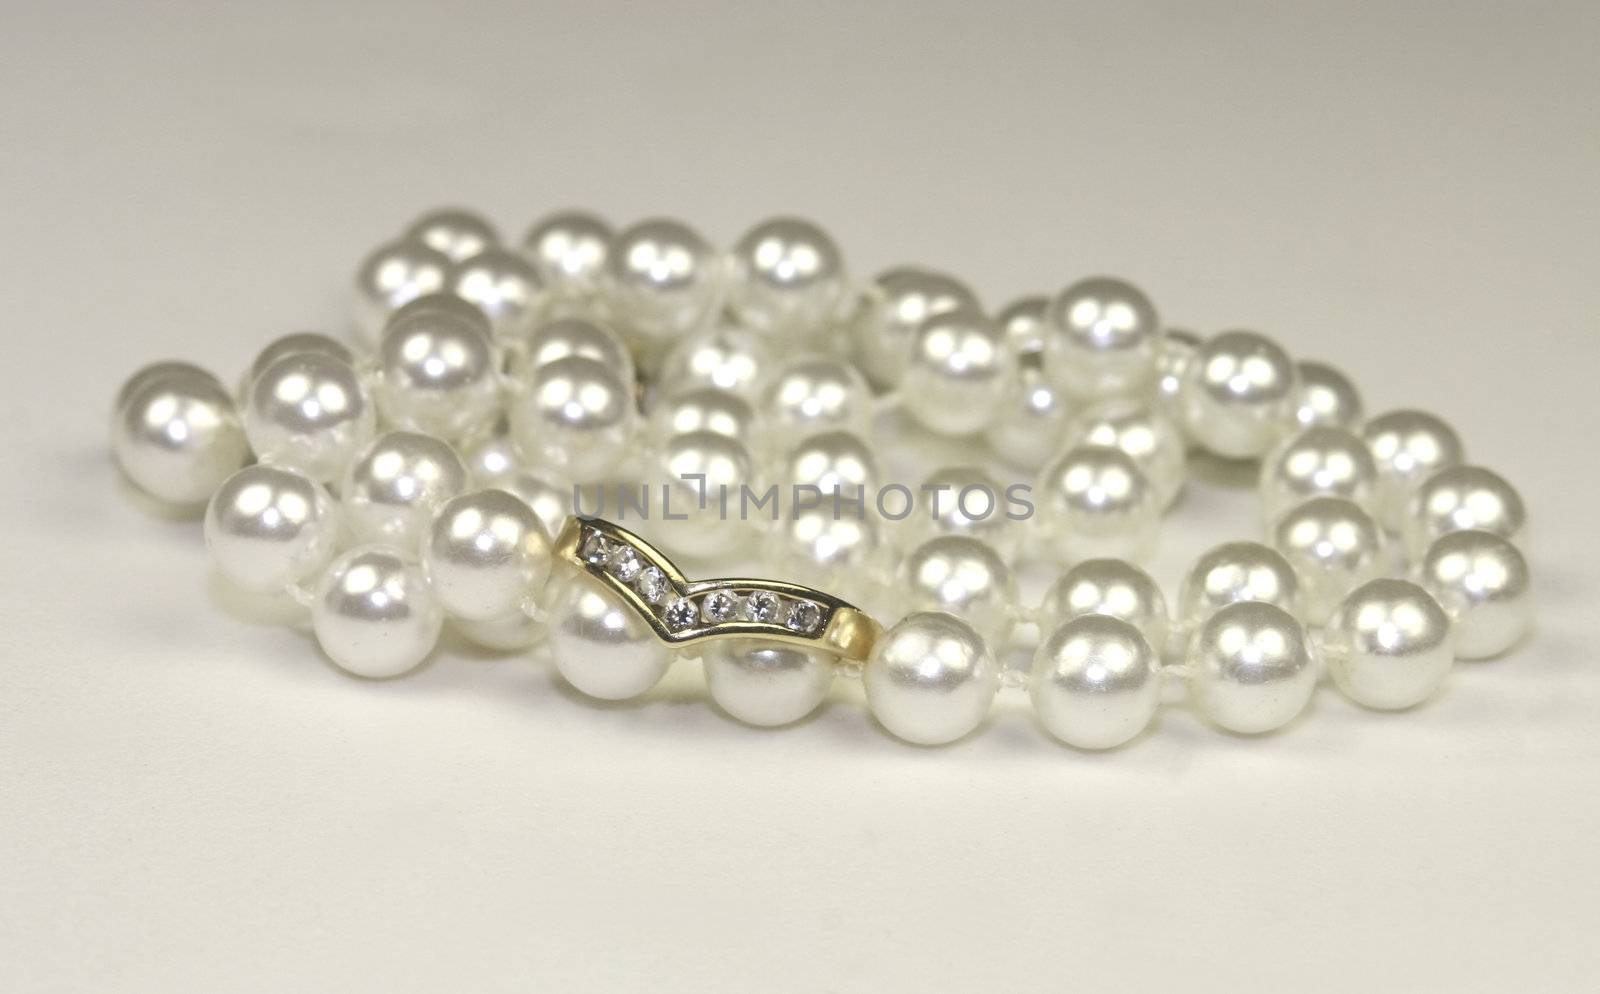 engagement rings and pearls by leafy